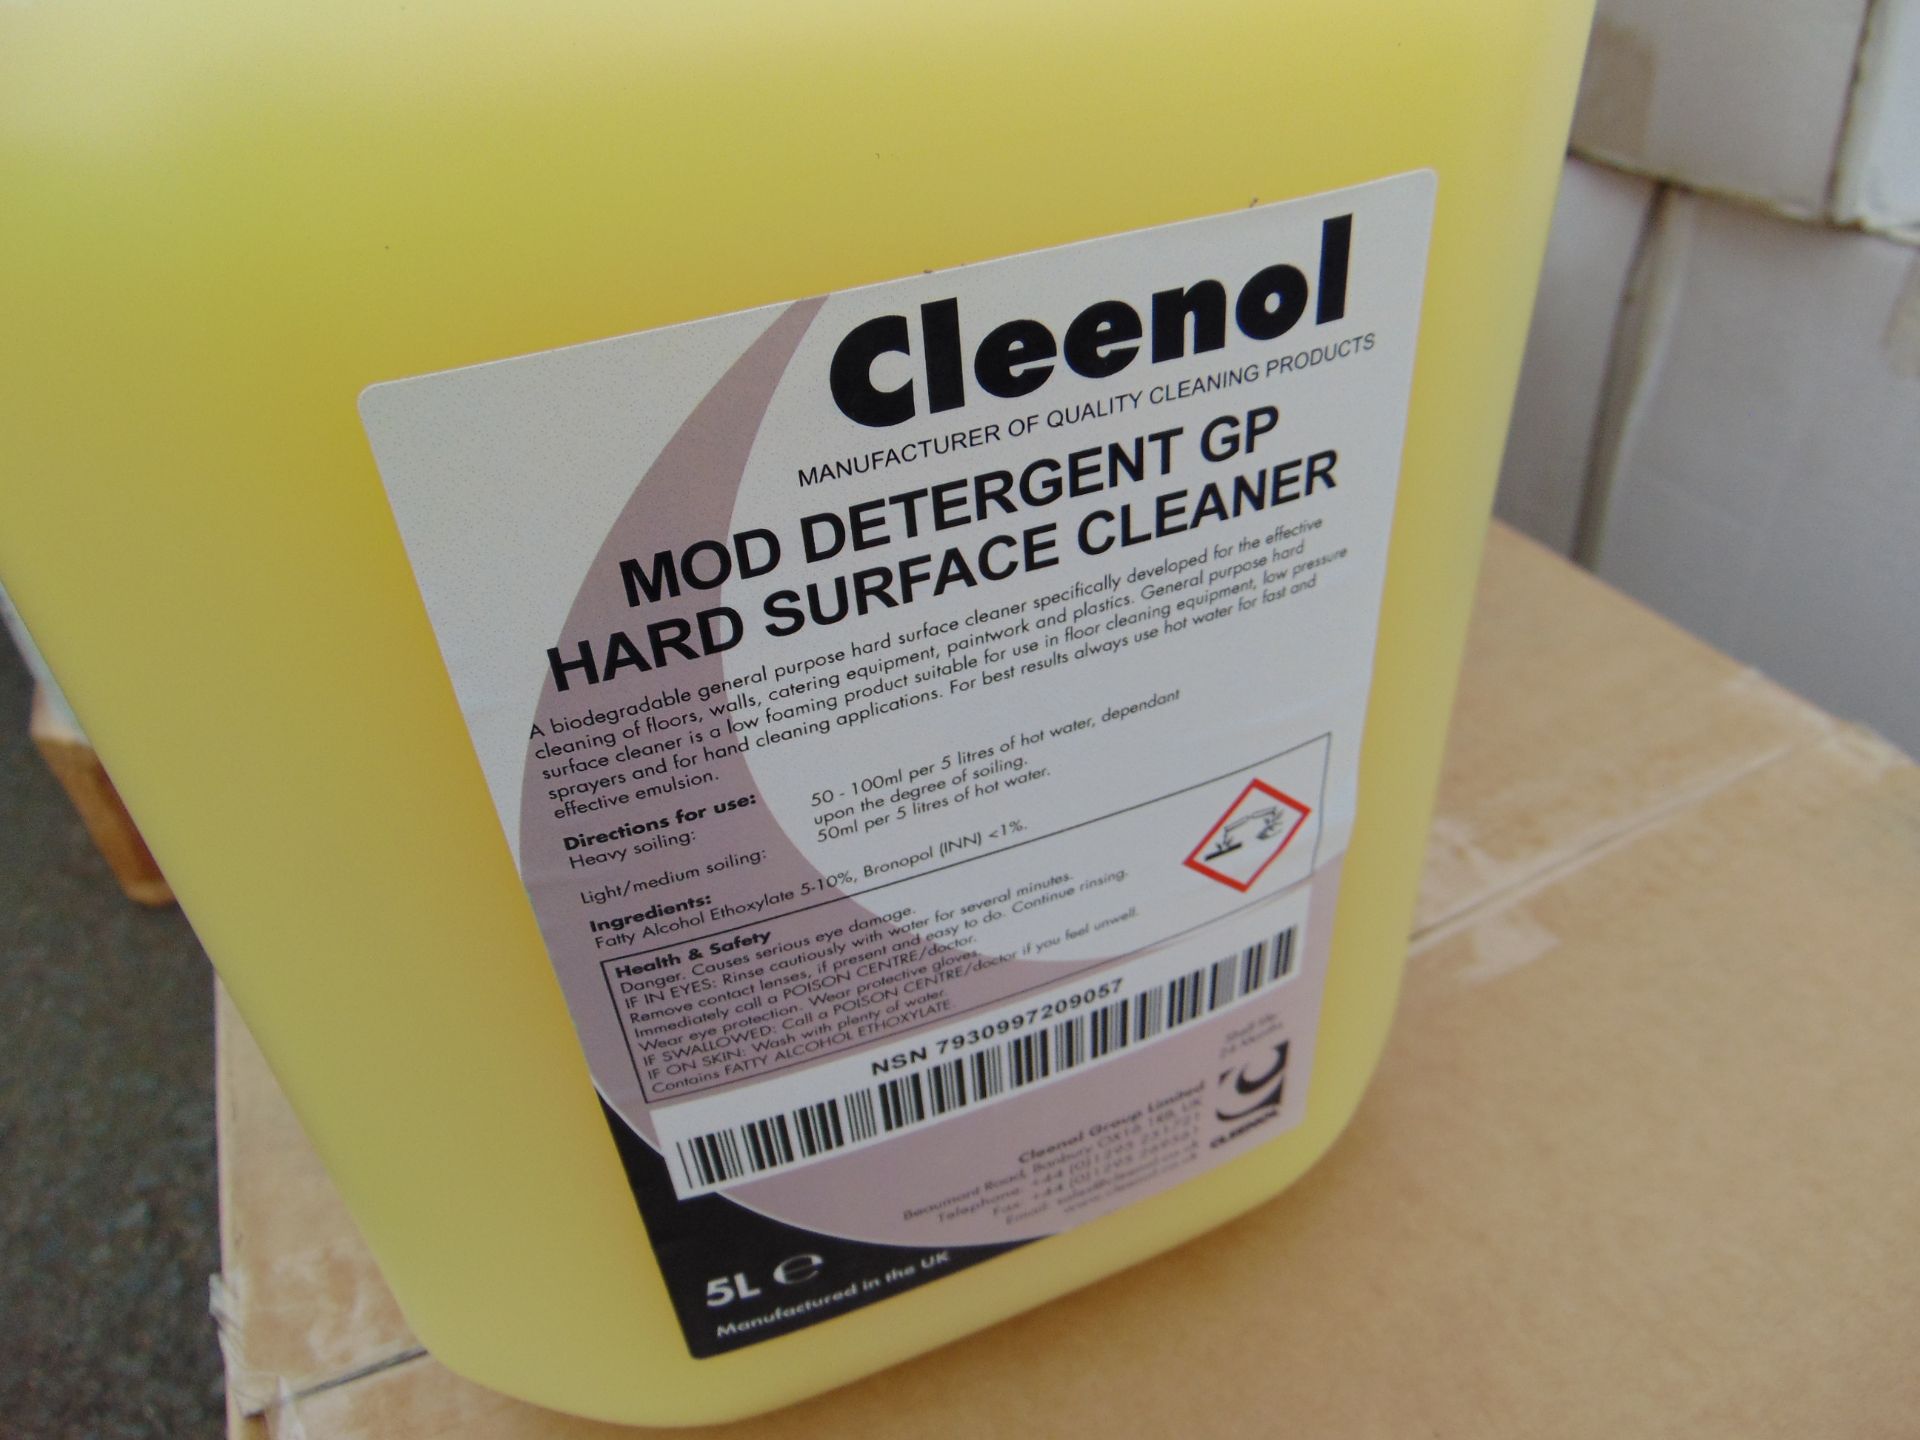 20x Unissued 5L Drums of Cleenol Hard Surface Cleaner - Image 2 of 2